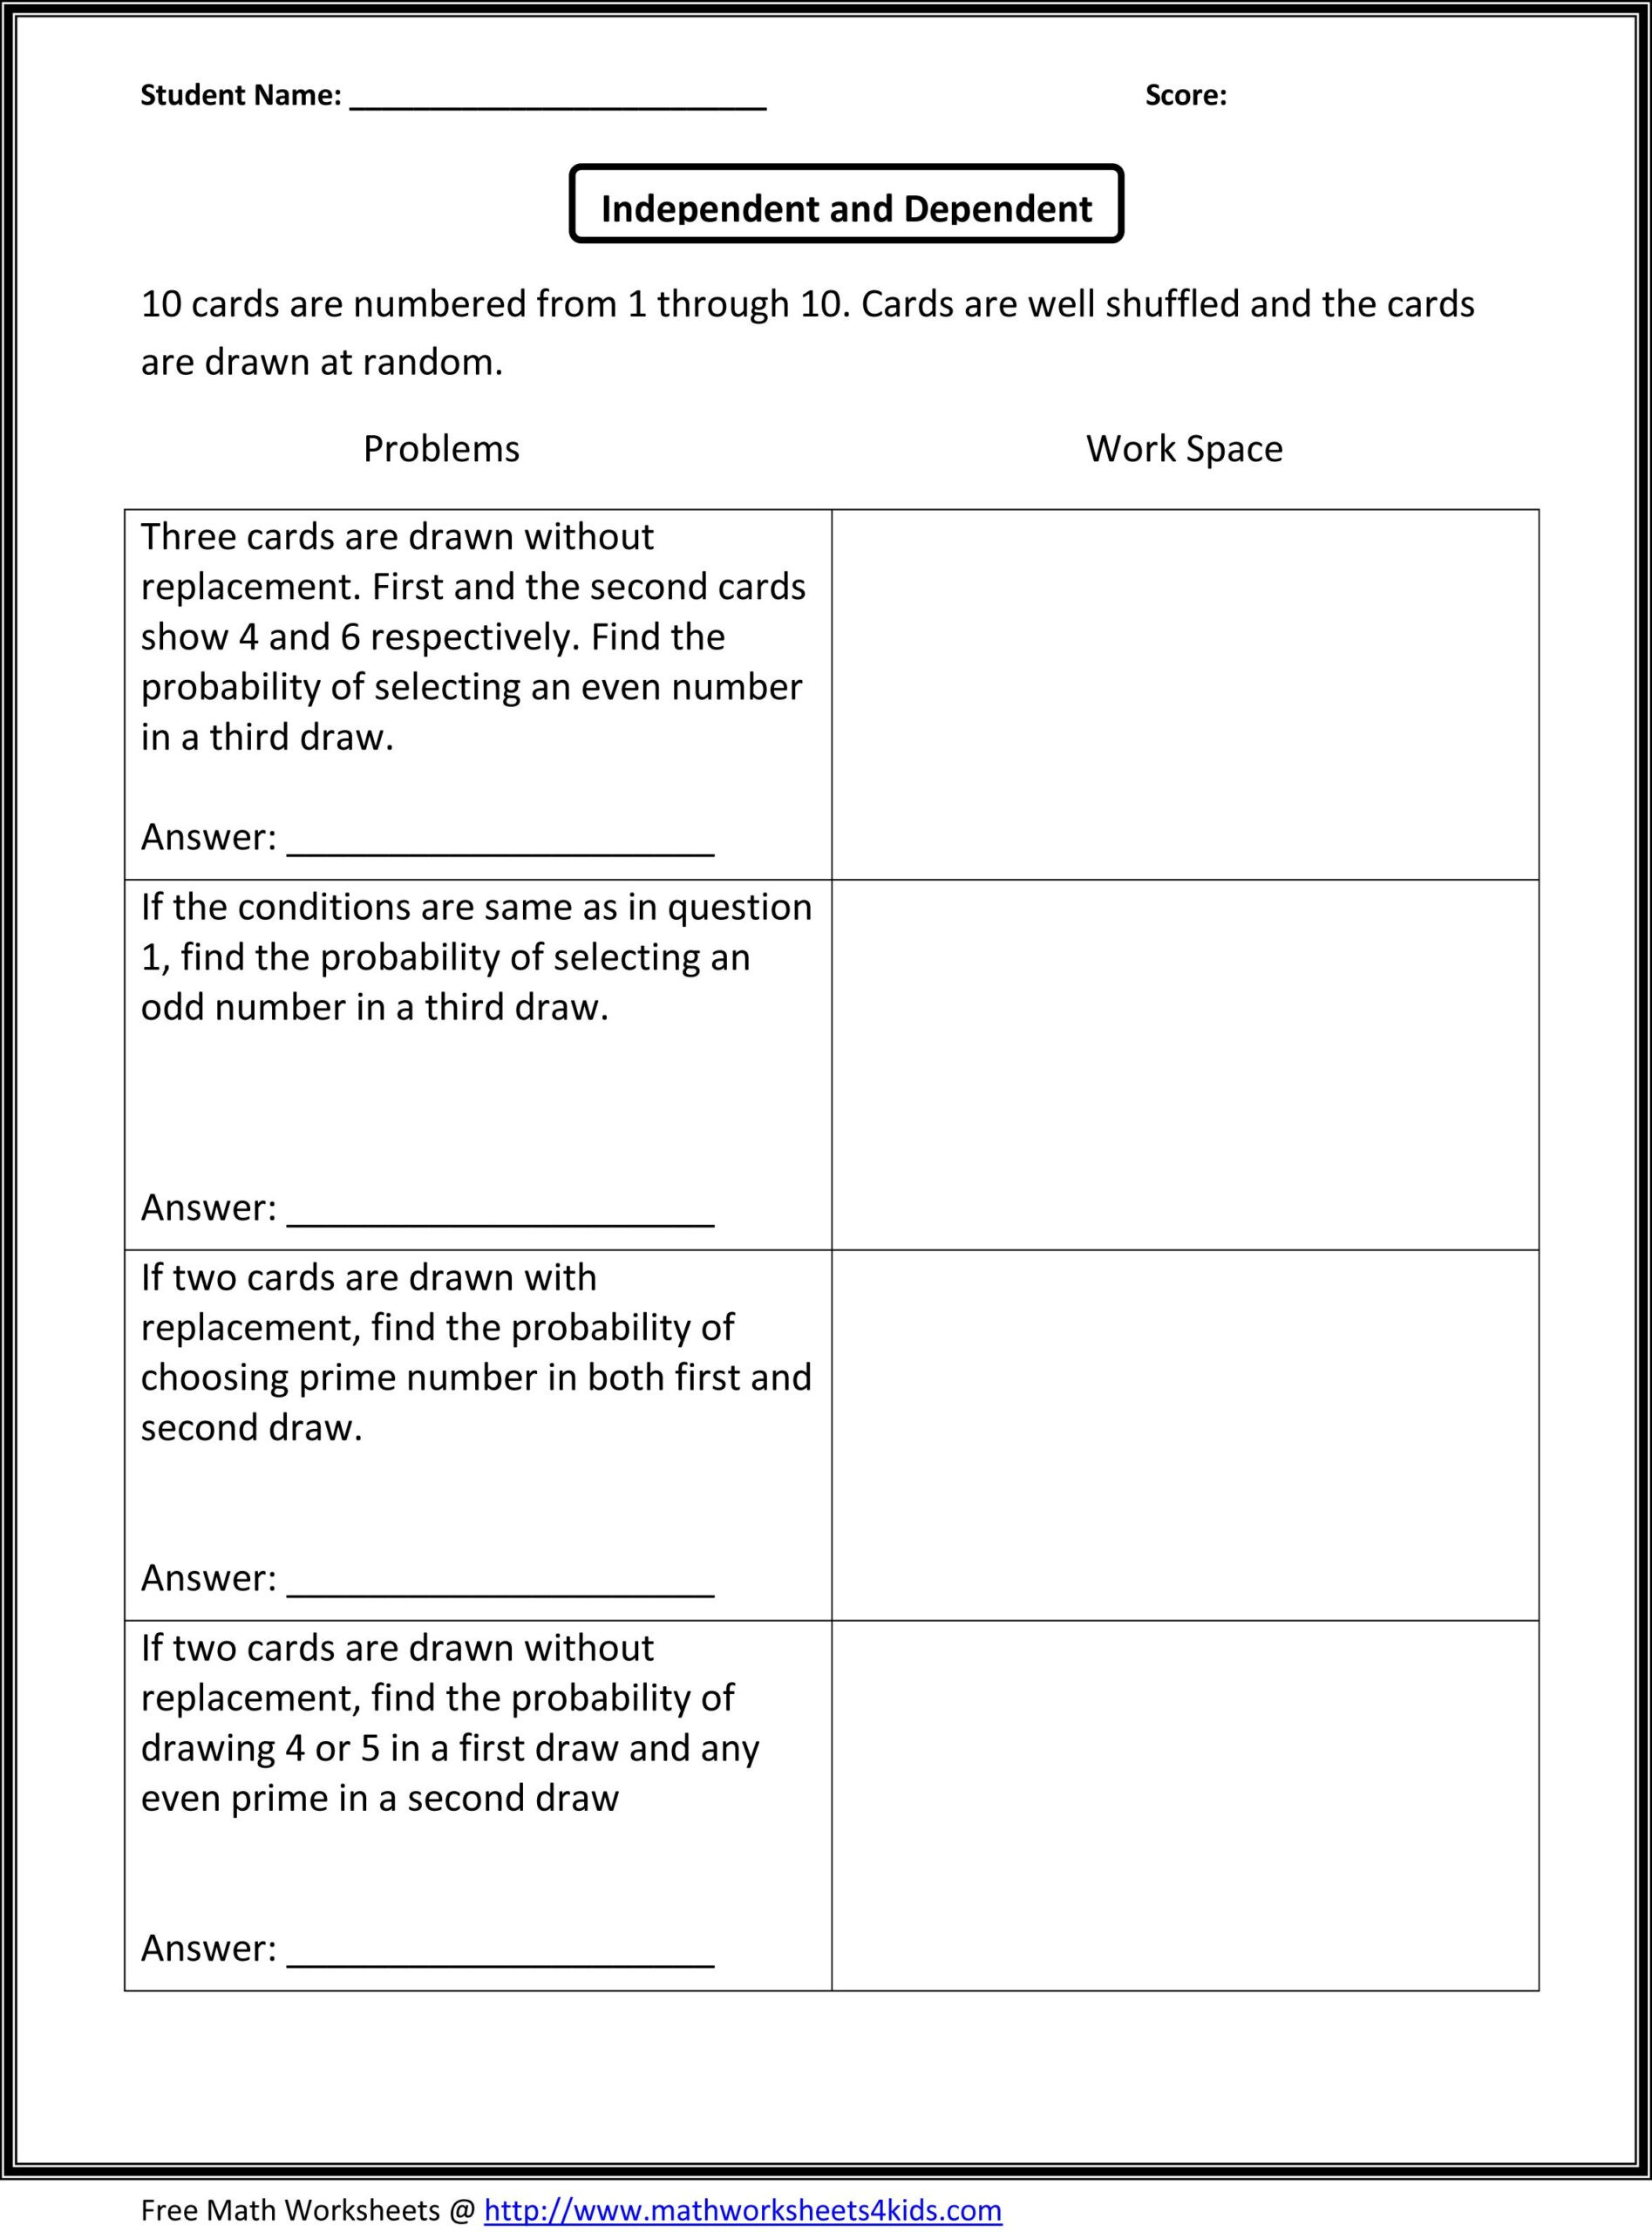 Simple Probability Worksheet Pdf Probability Independent and Dependent events Printable